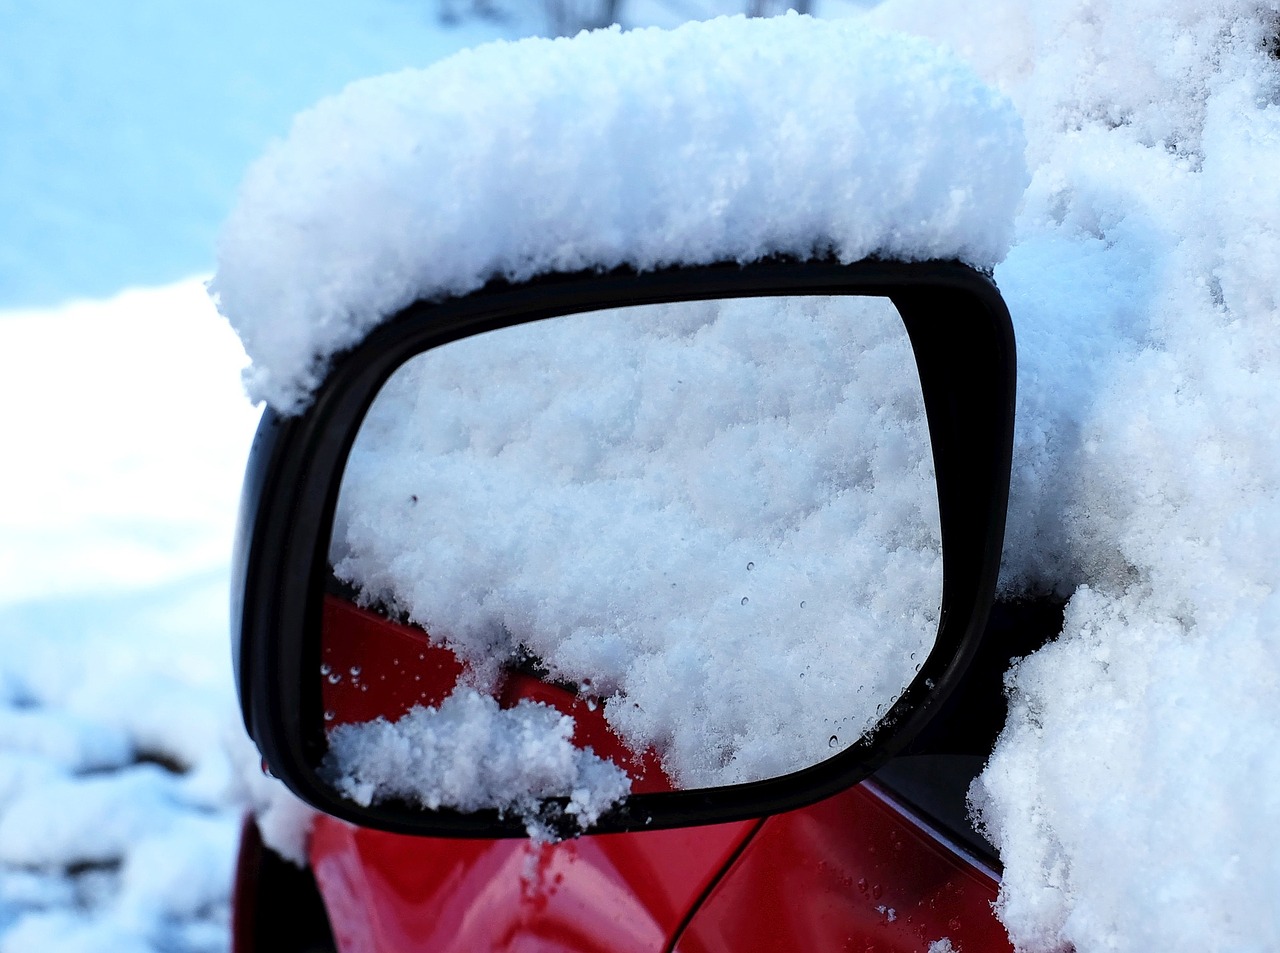 Take care of your windshield during the winter to avoid chips and cracks.